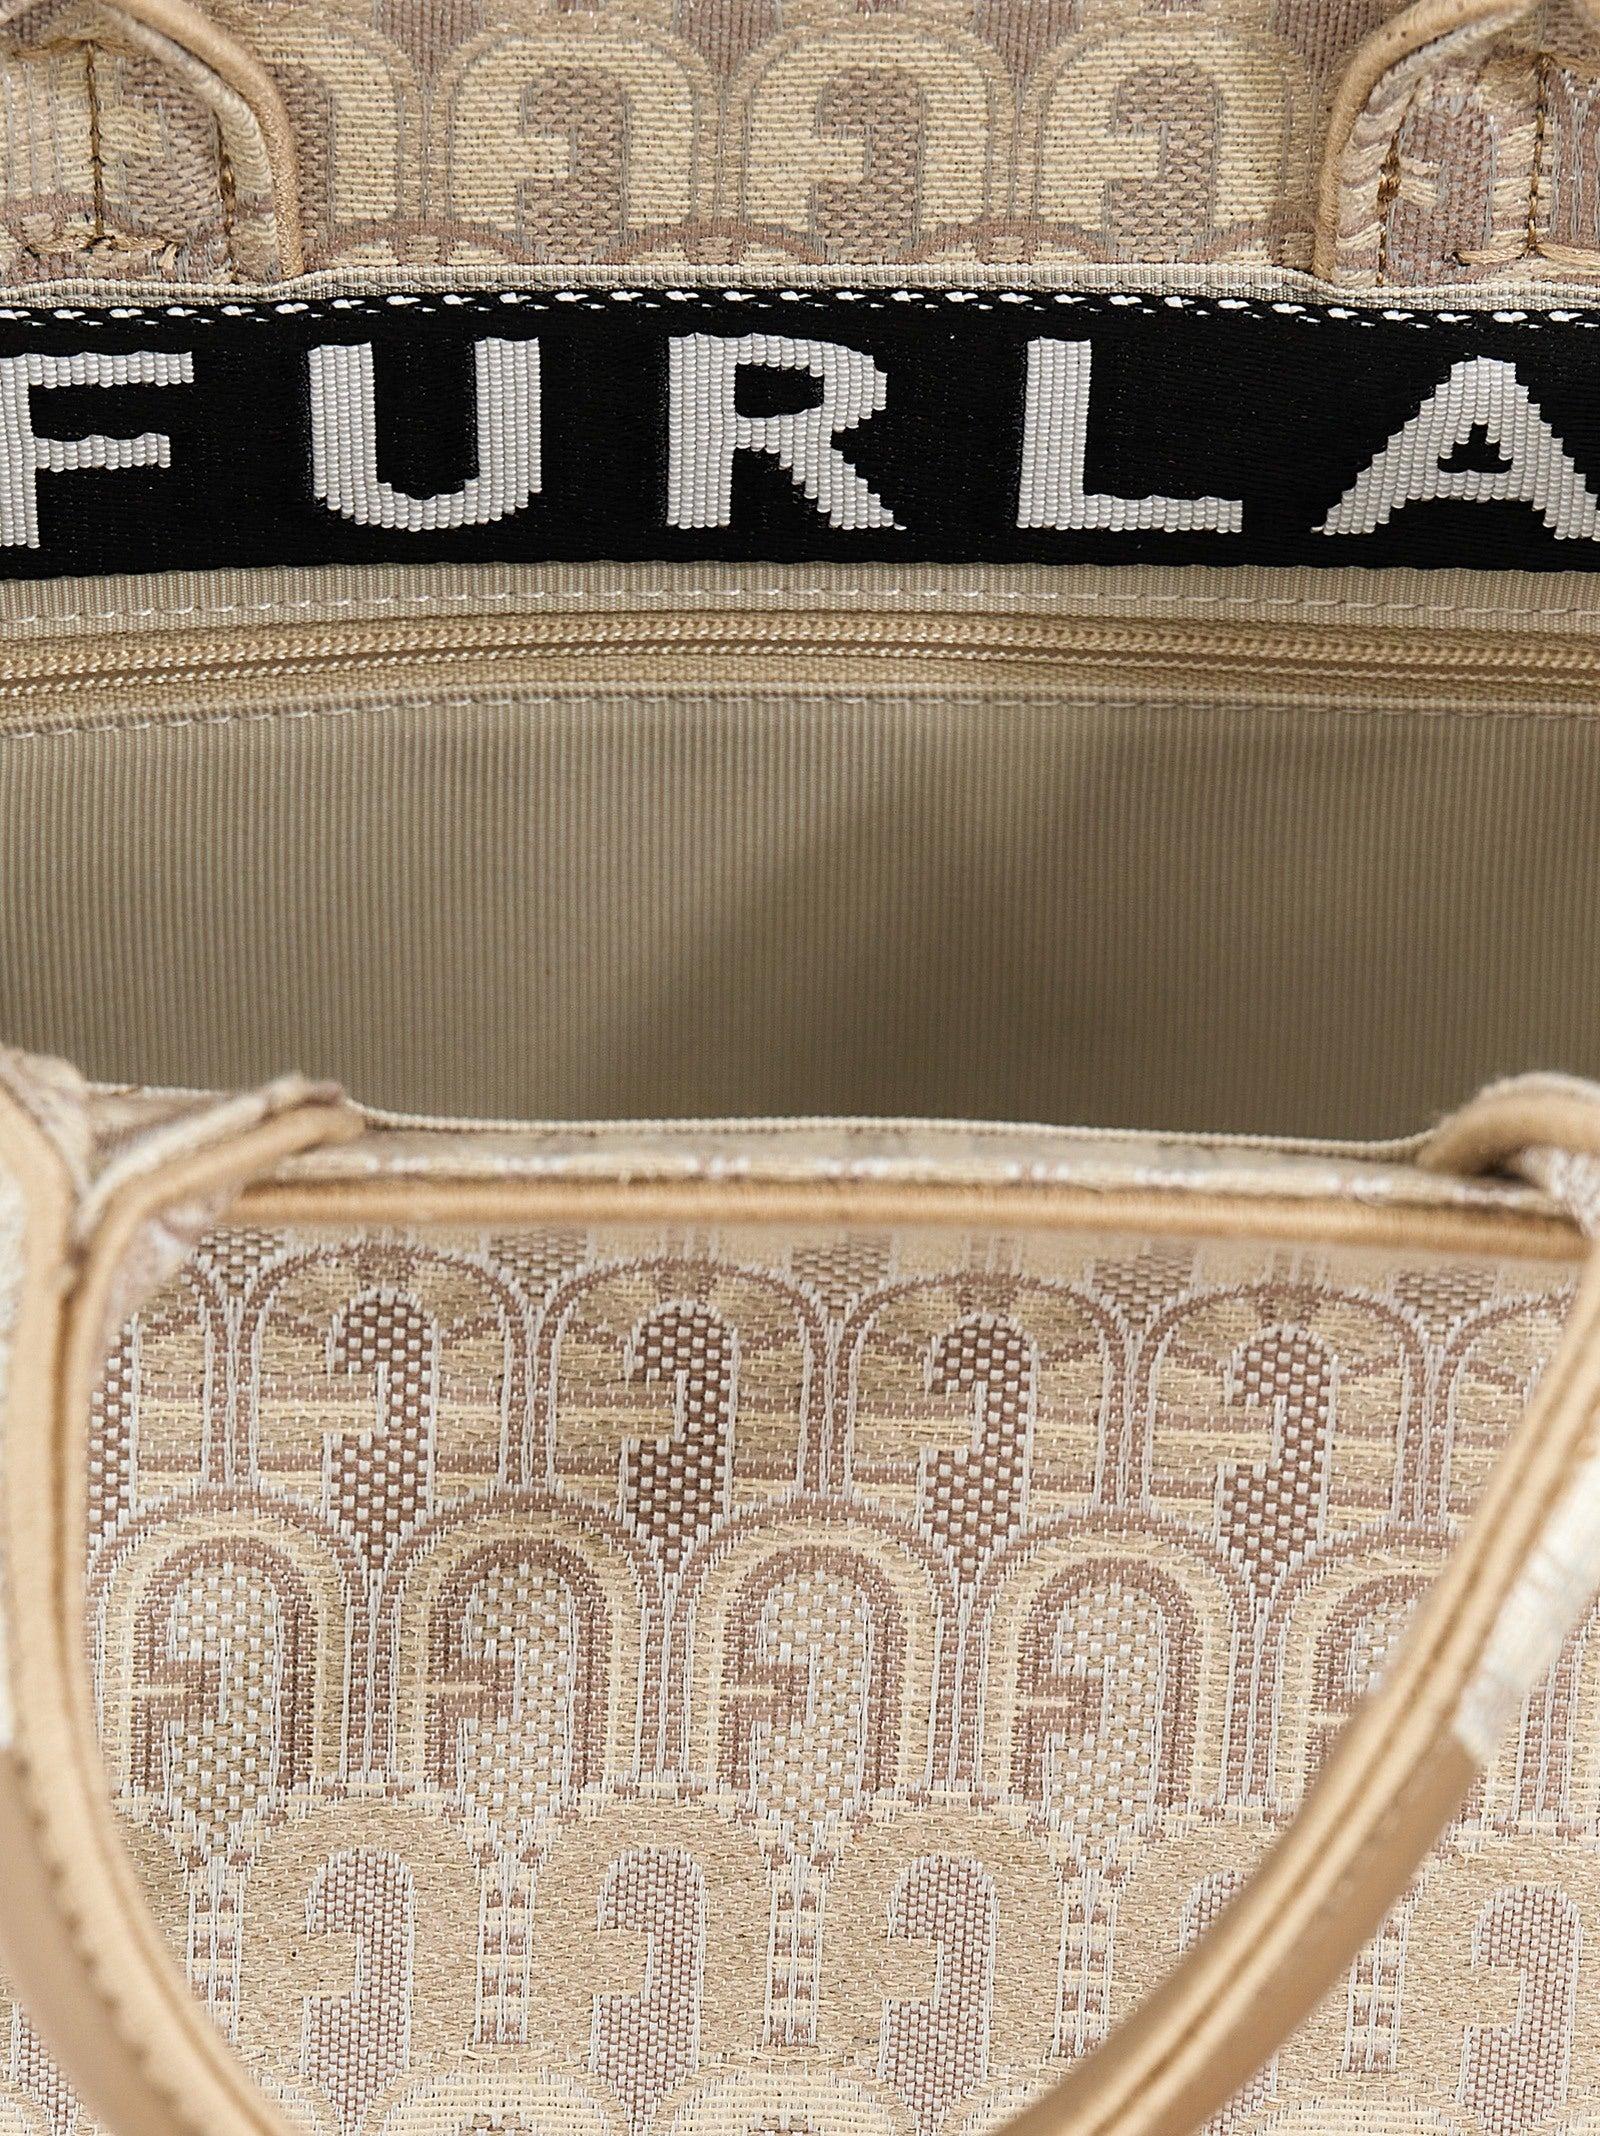 Furla Opportunity S Tote Bag in Brown